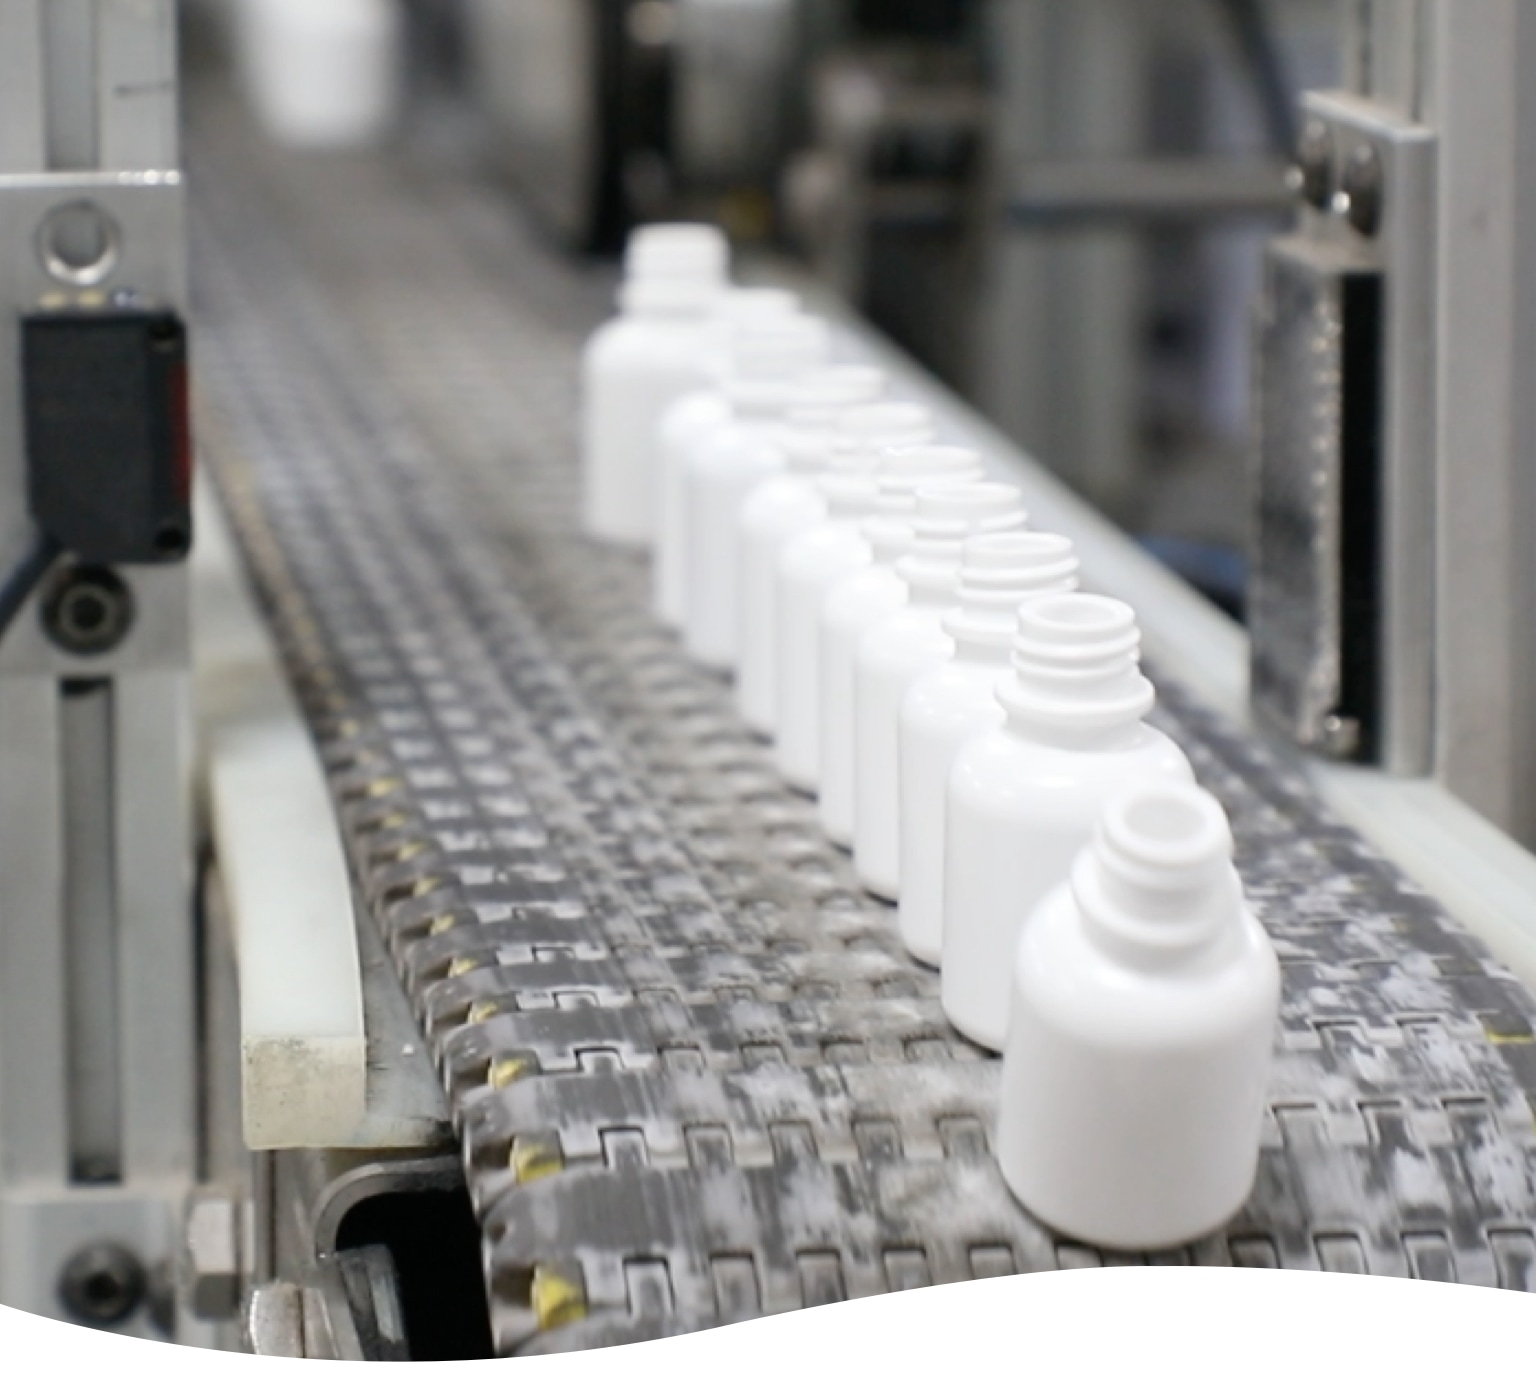 line of plastic manufactured bottles coming off assembly line